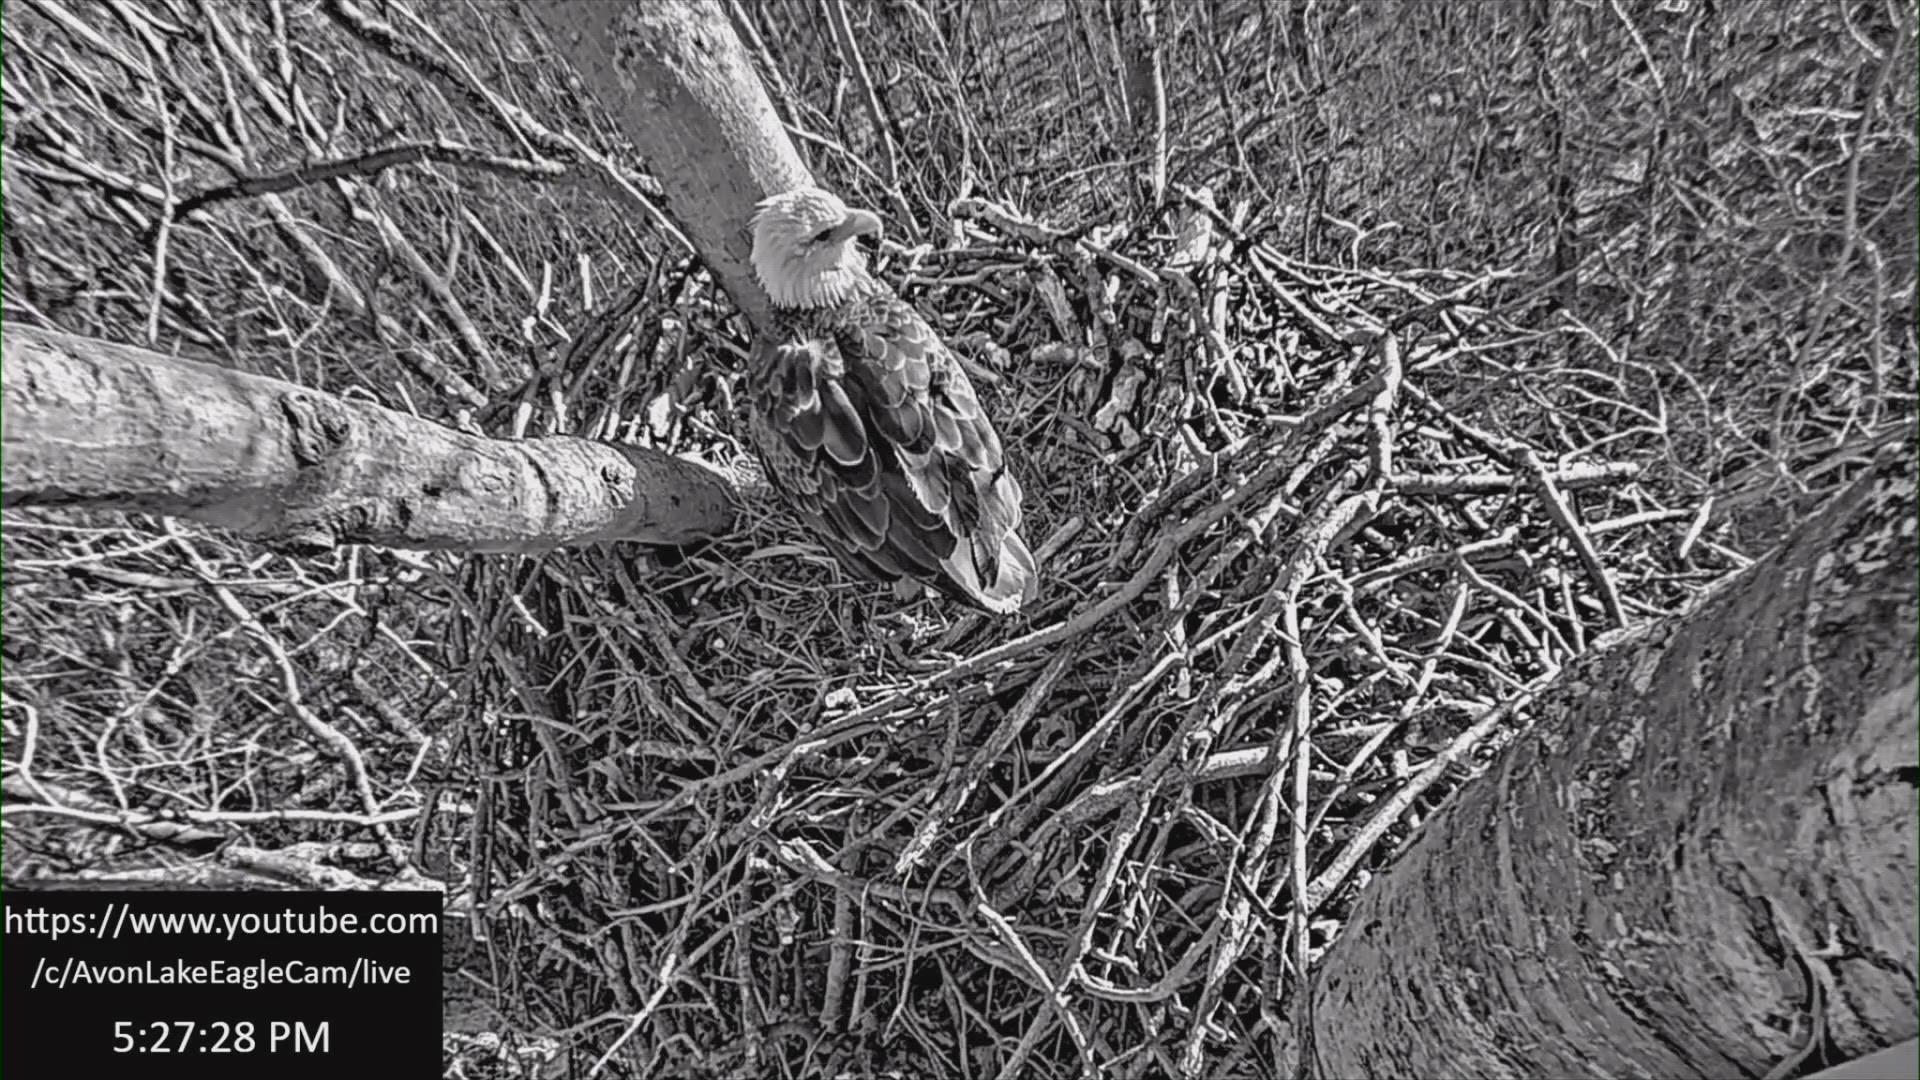 The bald eagle parents, named Stars and Stripes, have had a nest at Avon Lake's Redwood Elementary School since 2014. Eggs usually take 40 days to hatch.